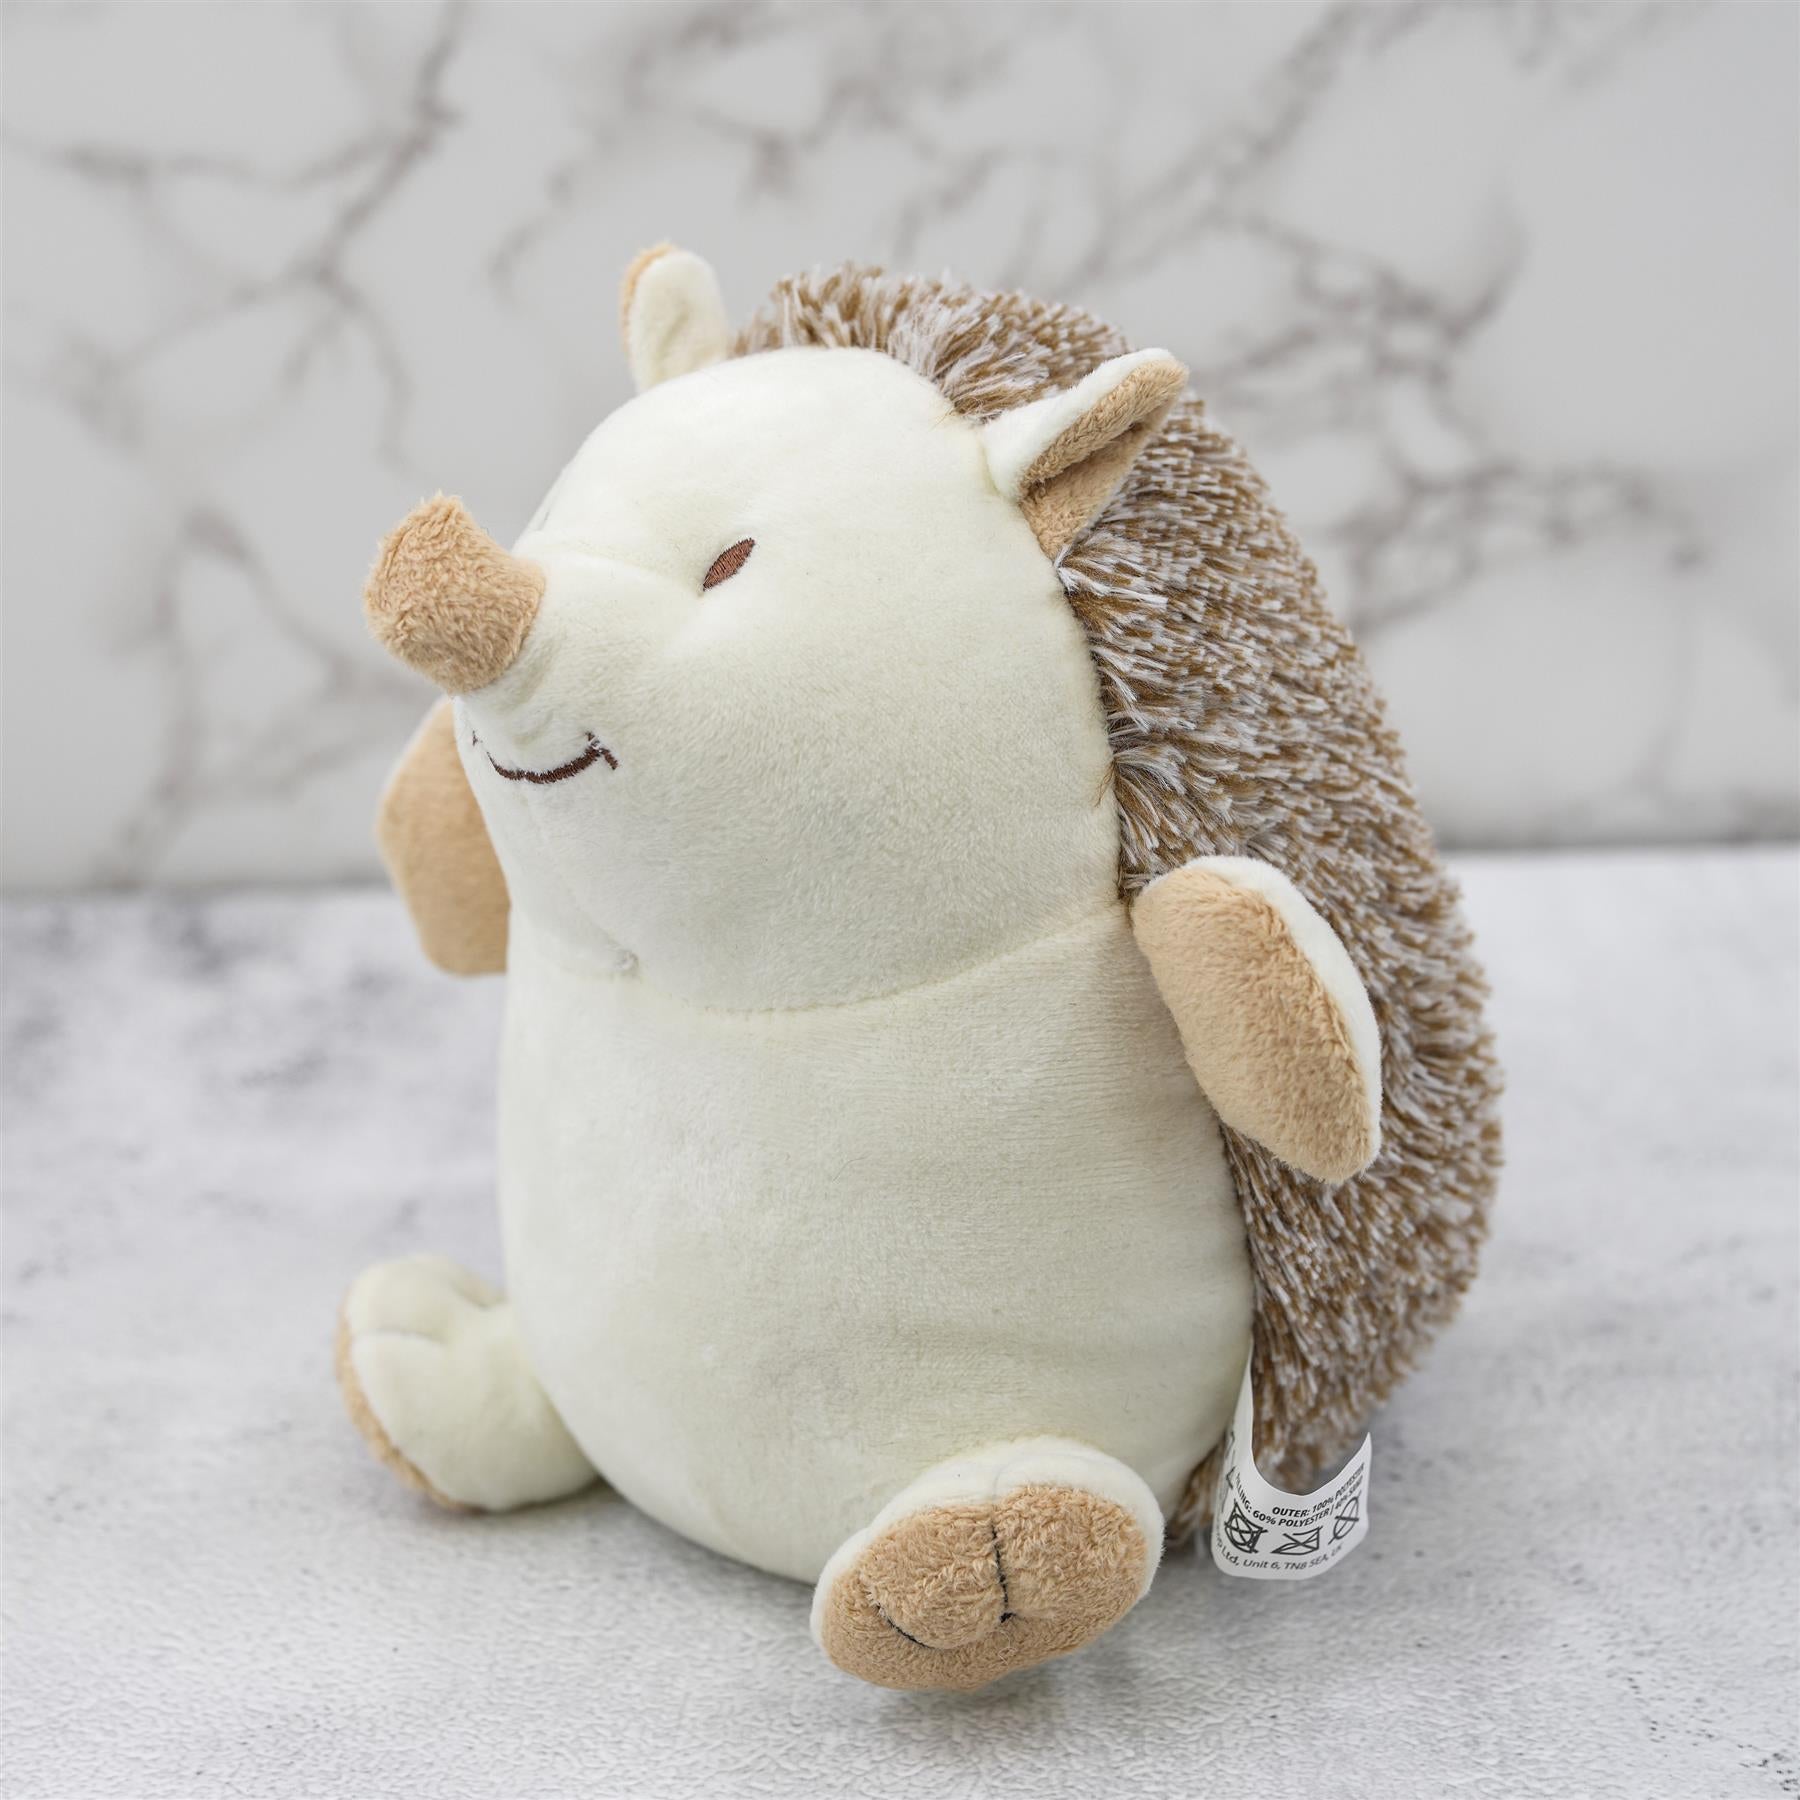 Hedgehog Novelty Door Stopper by The Magic Toy Shop - UKBuyZone